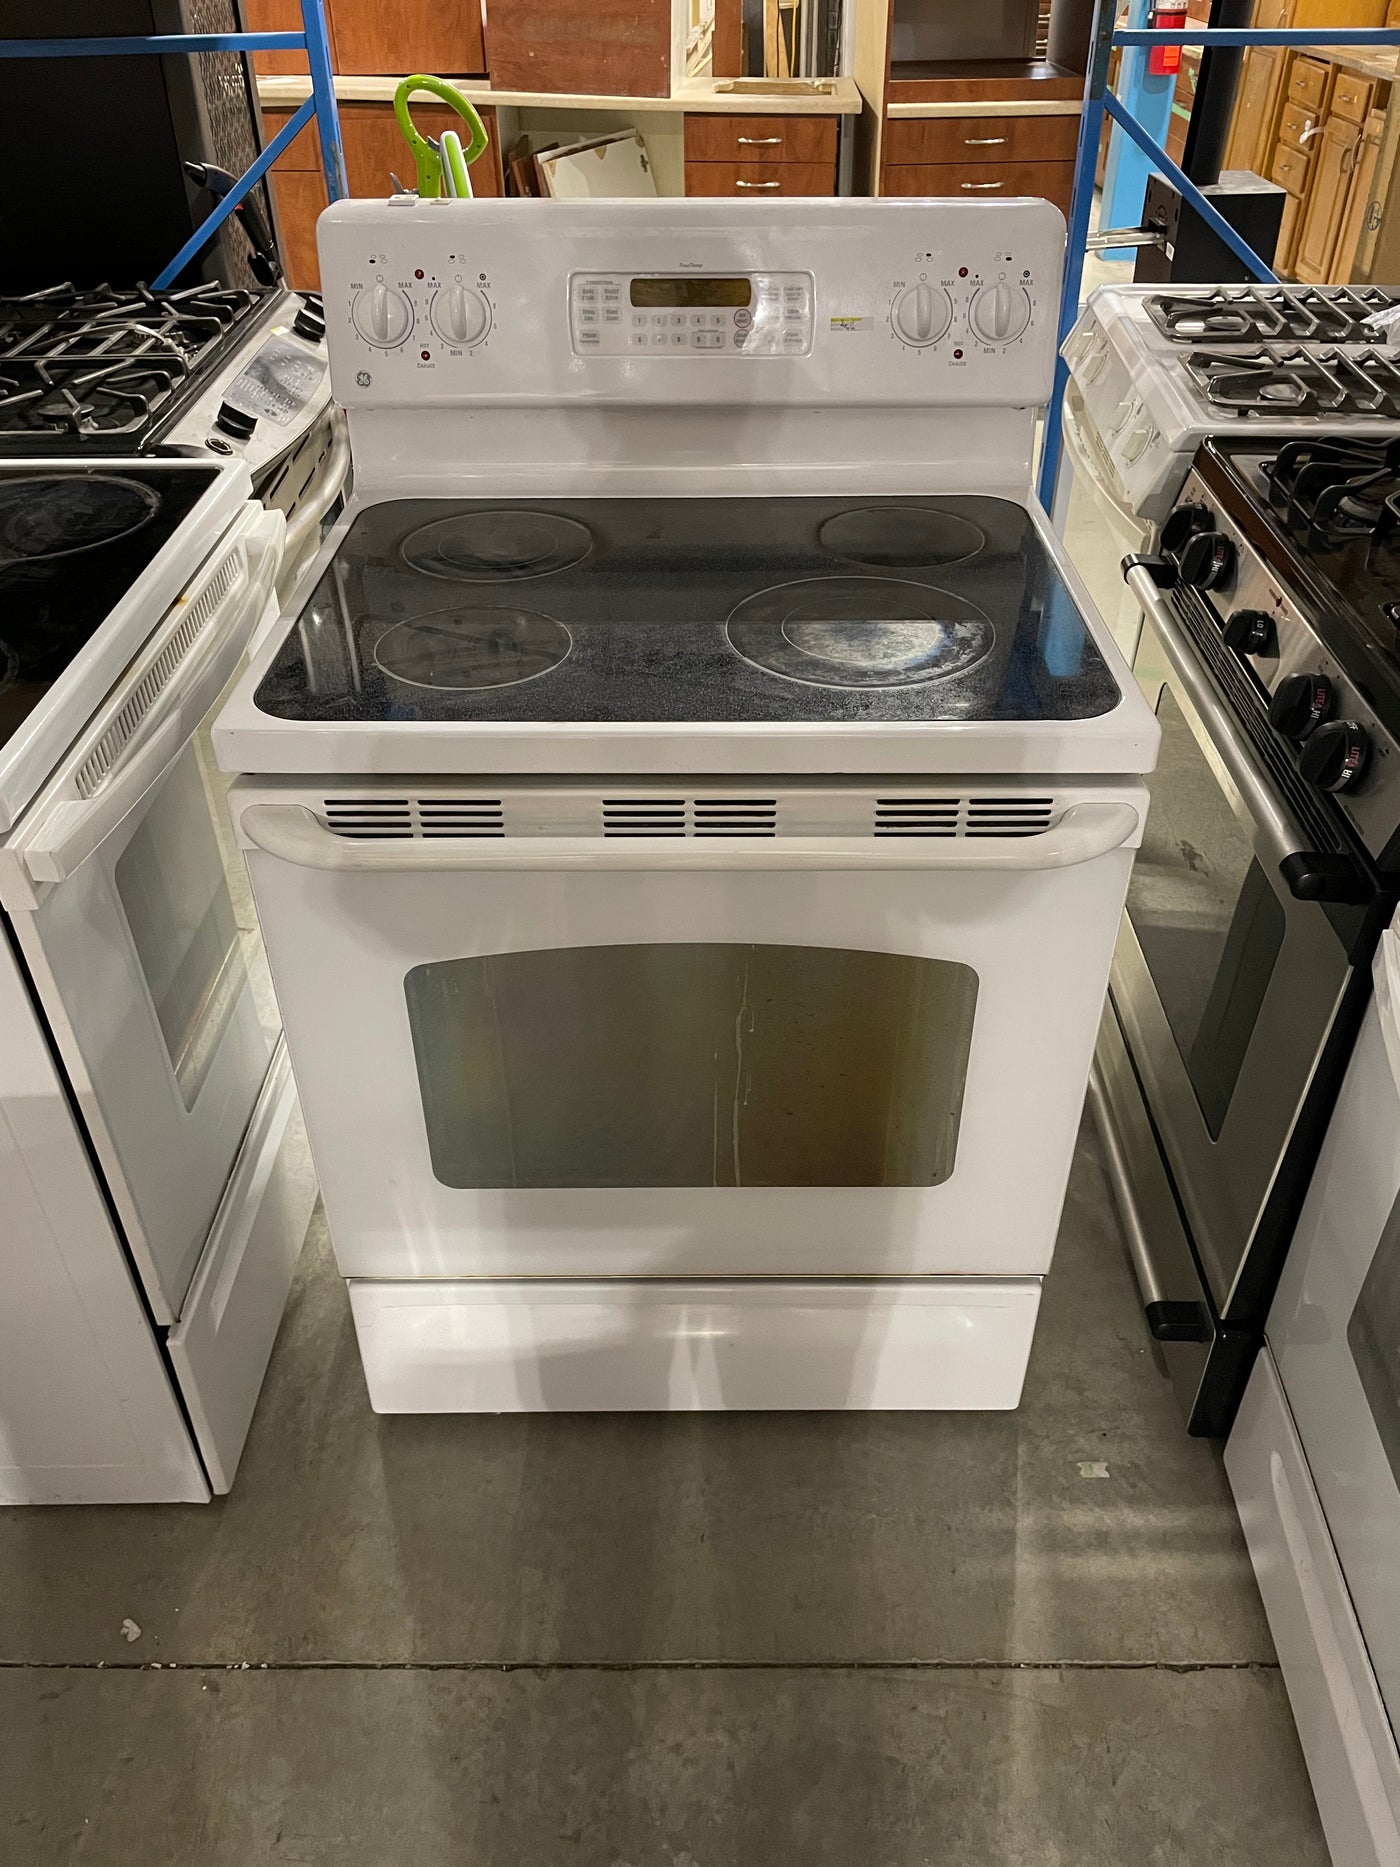 General Electric Stovetop & Oven in Stainless Steel - appliances - by owner  - sale - craigslist